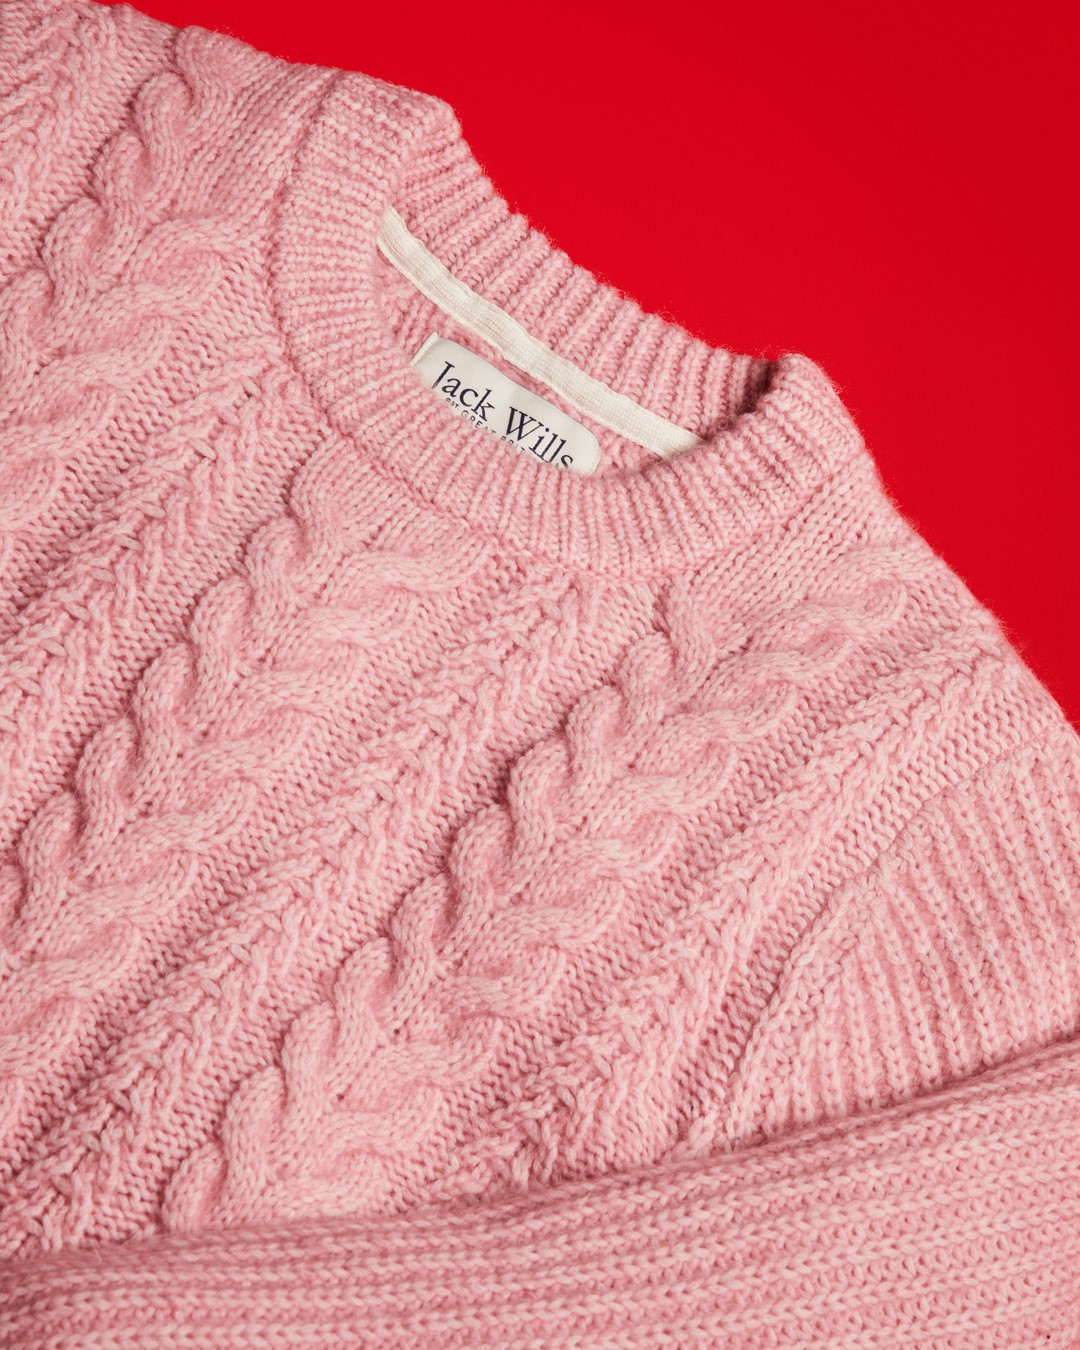 Christmas is coming, which means there's no better time to stock up on our Cable Knits 🧶⠀⠀⠀⠀⠀⠀⠀⠀⠀